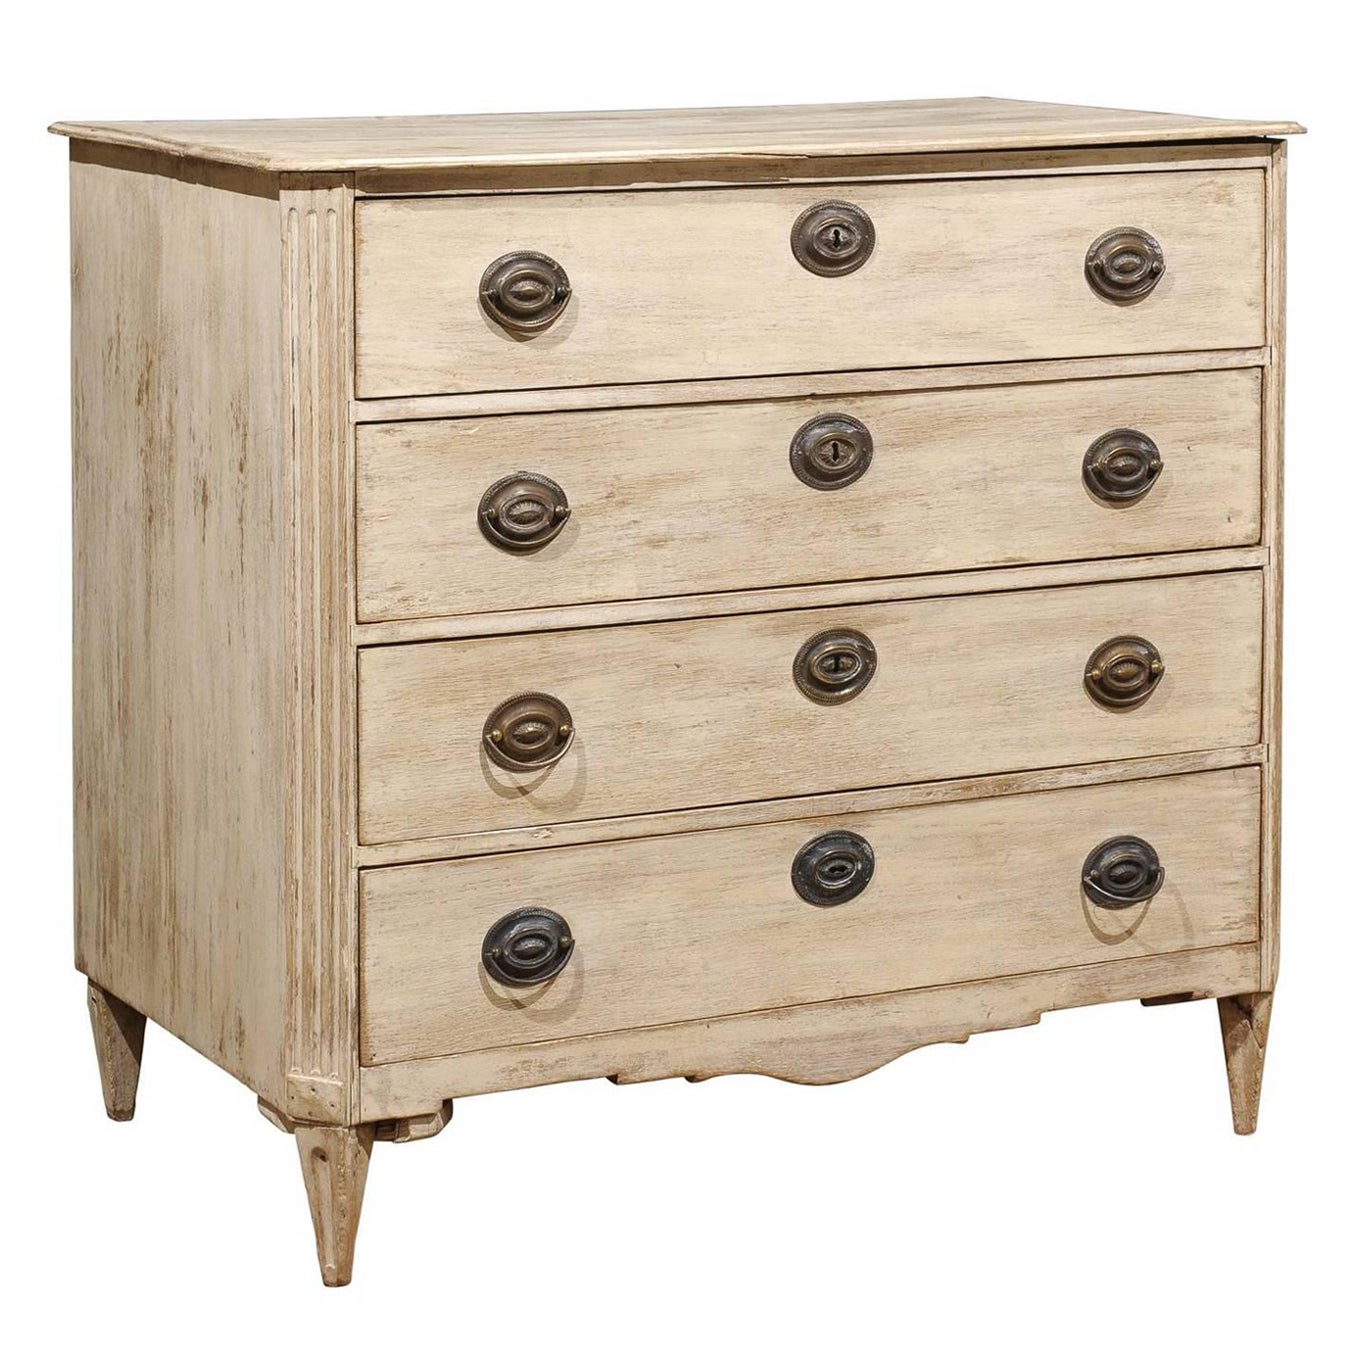 Swedish 1780s Gustavian Period Four-Drawer Commode with Chamfered Side Posts